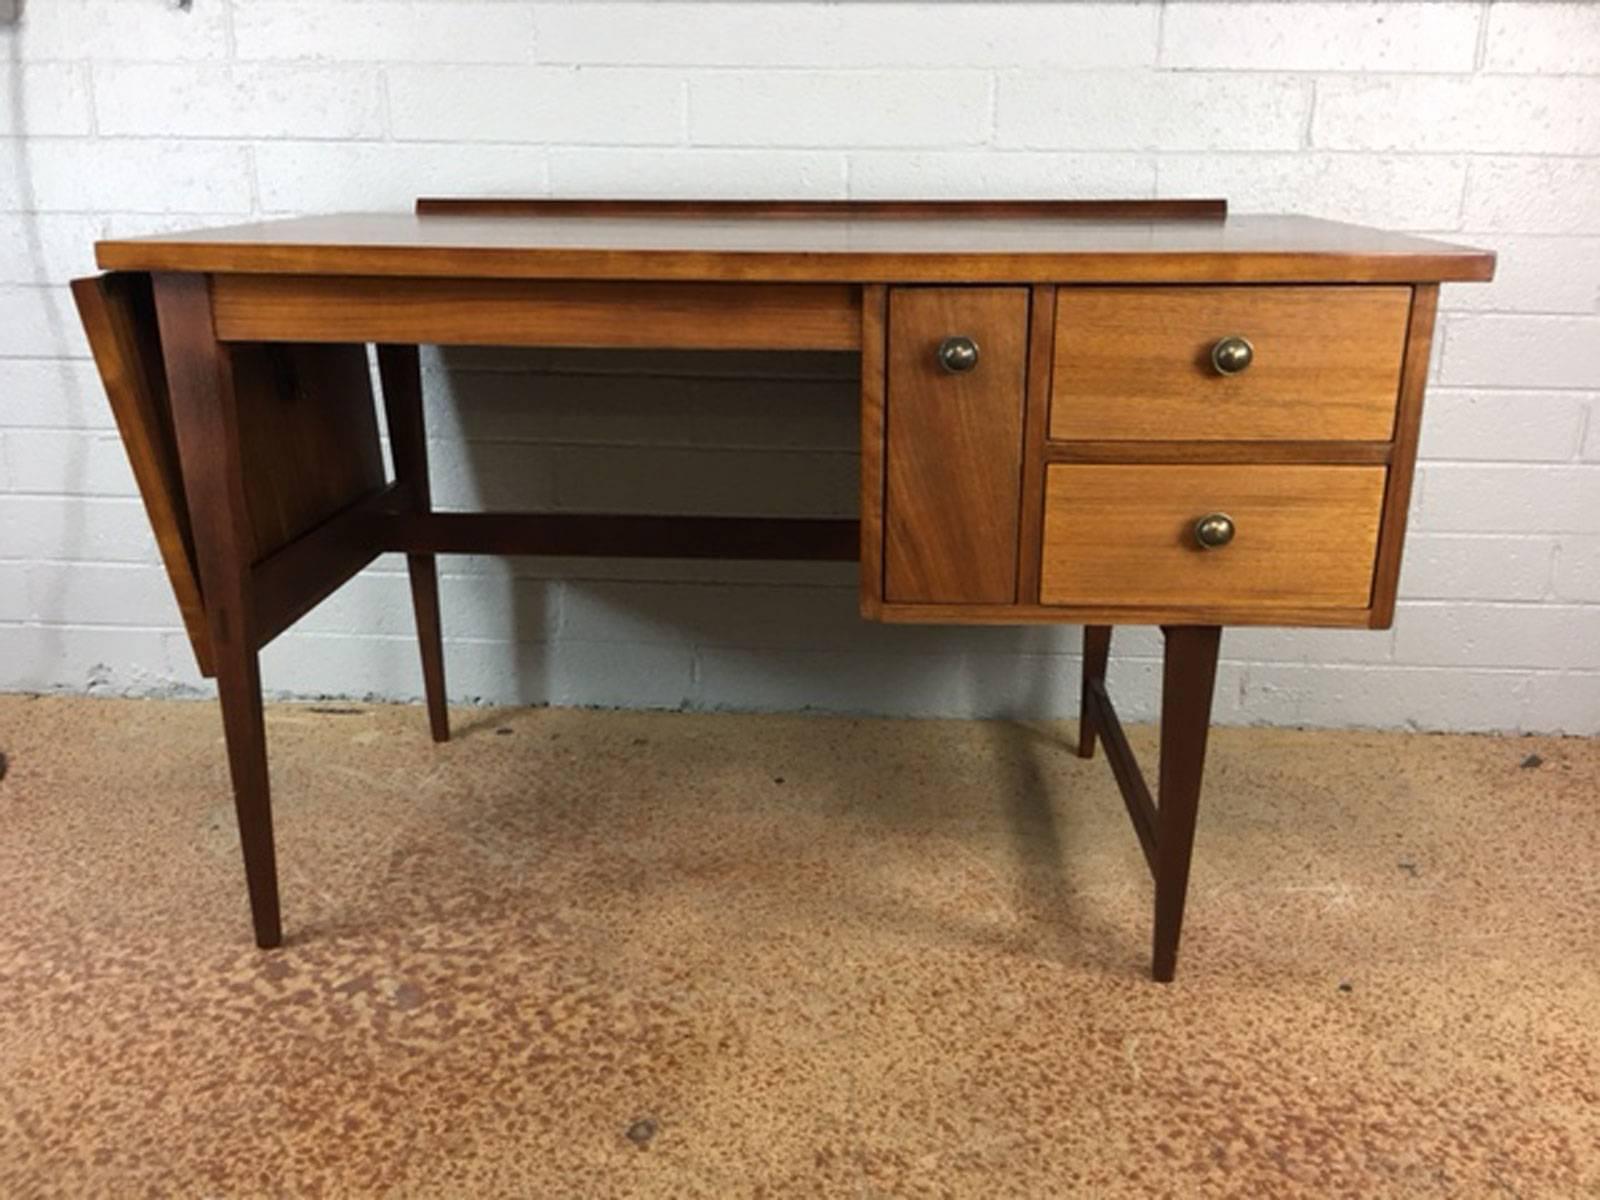 Unique drop-leaf desk by Lane Altavista in walnut. Refinished. Clean lines, circa 1960s. The drop leaf extends the width of the desk by another 16